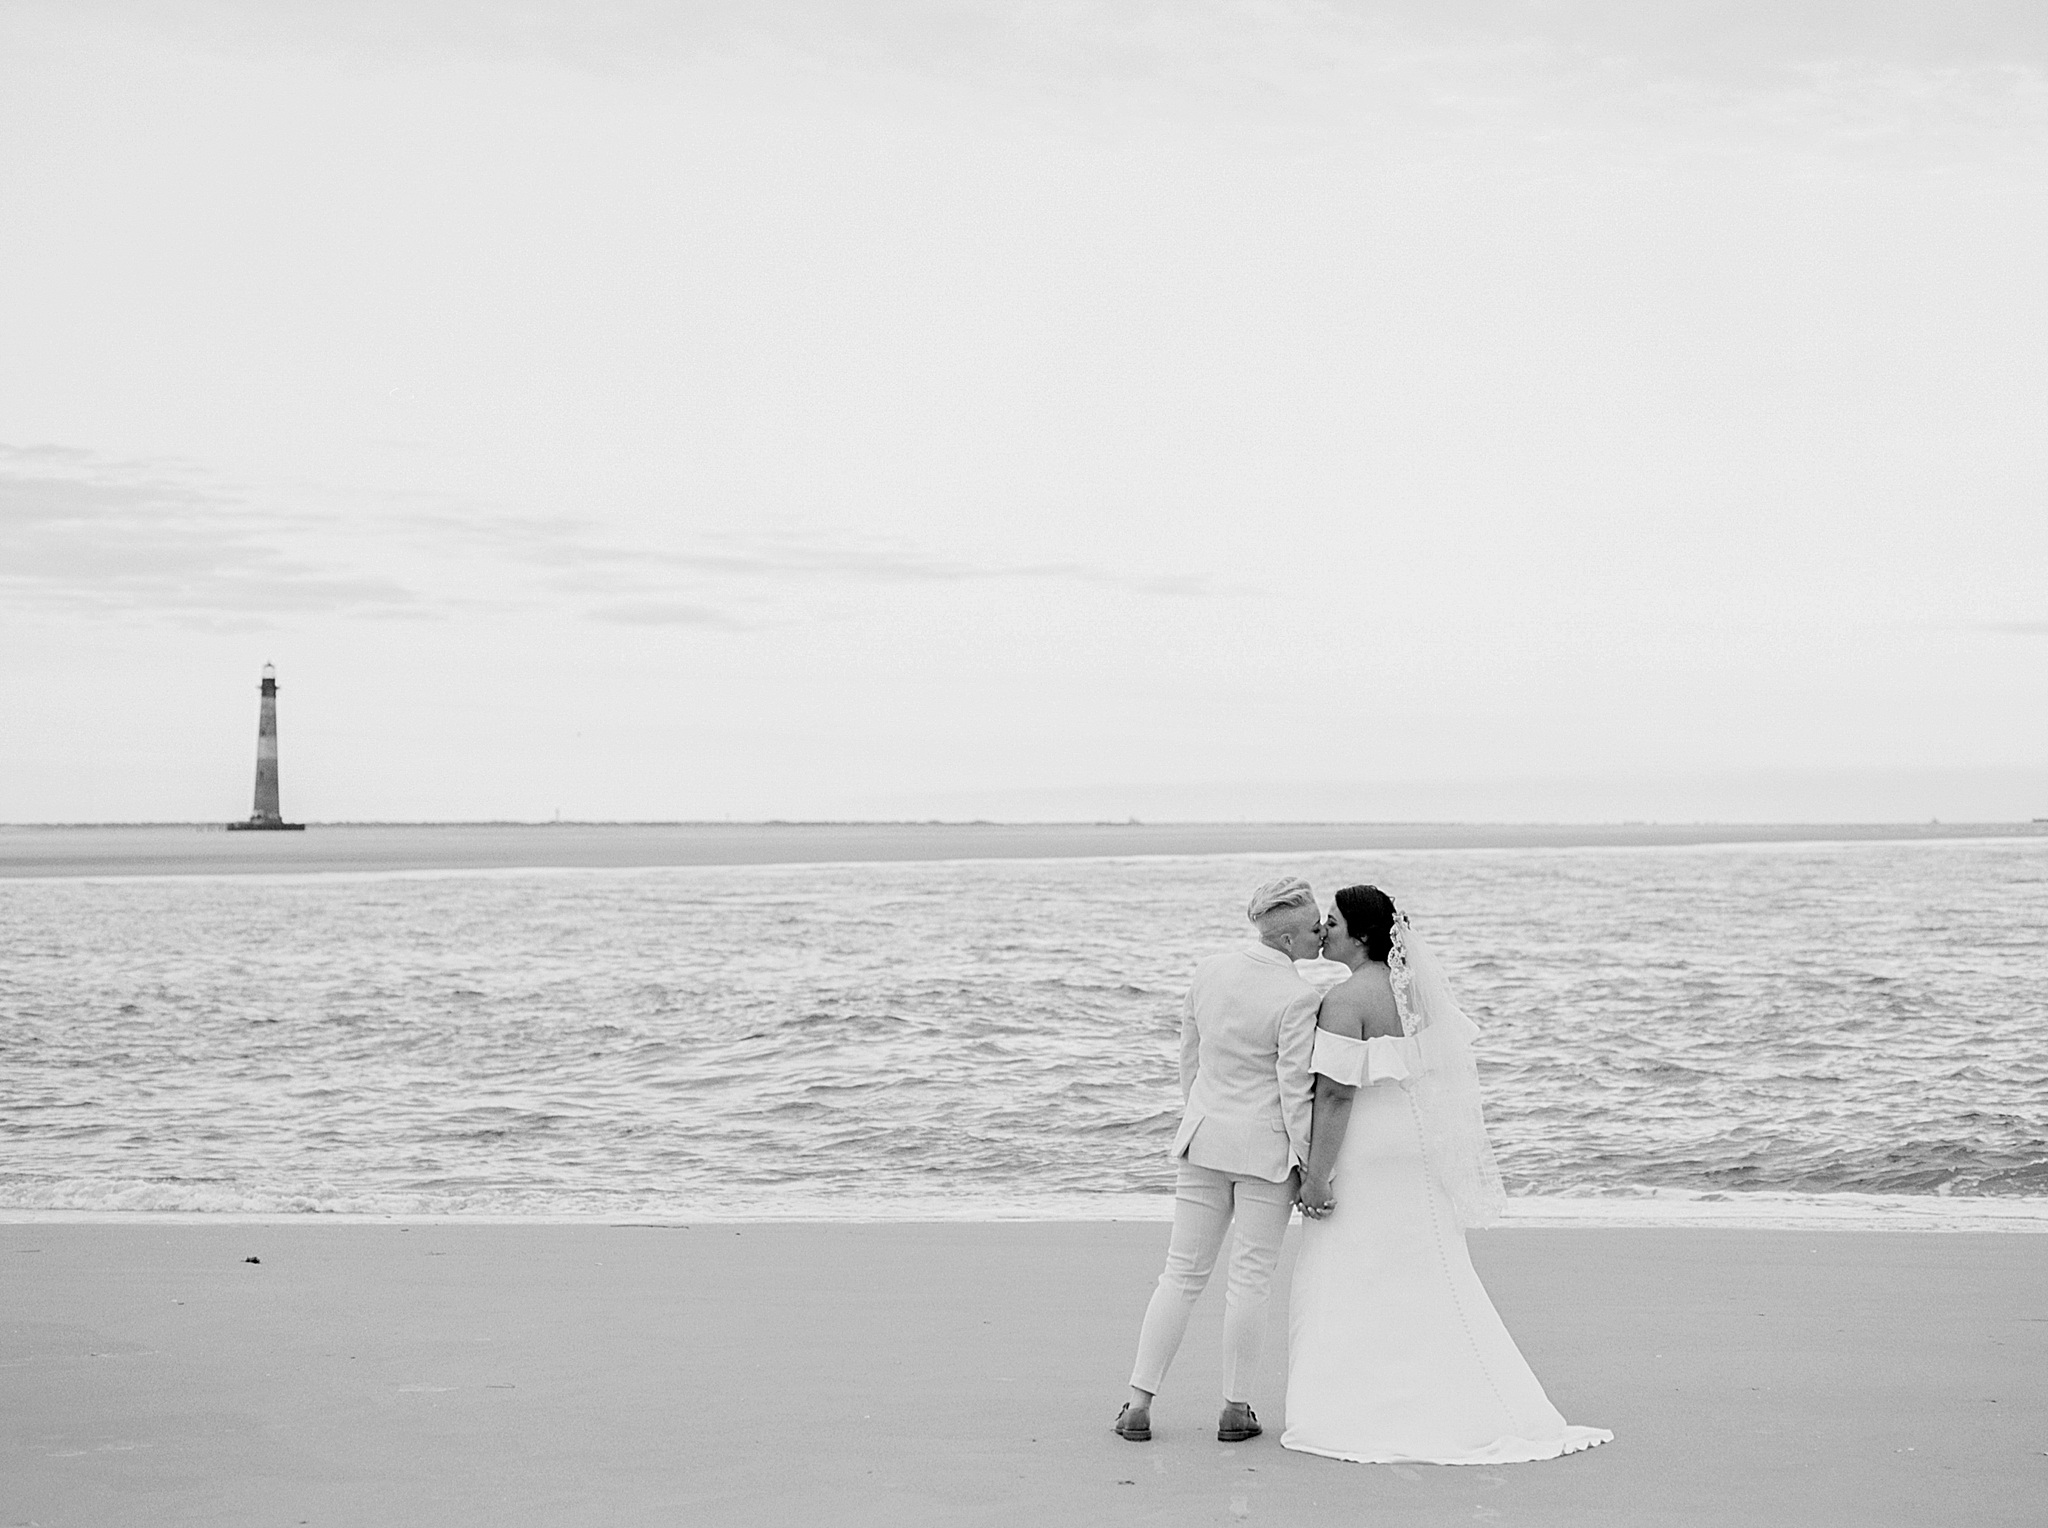 couple kisses on beach with lighthouse in distance